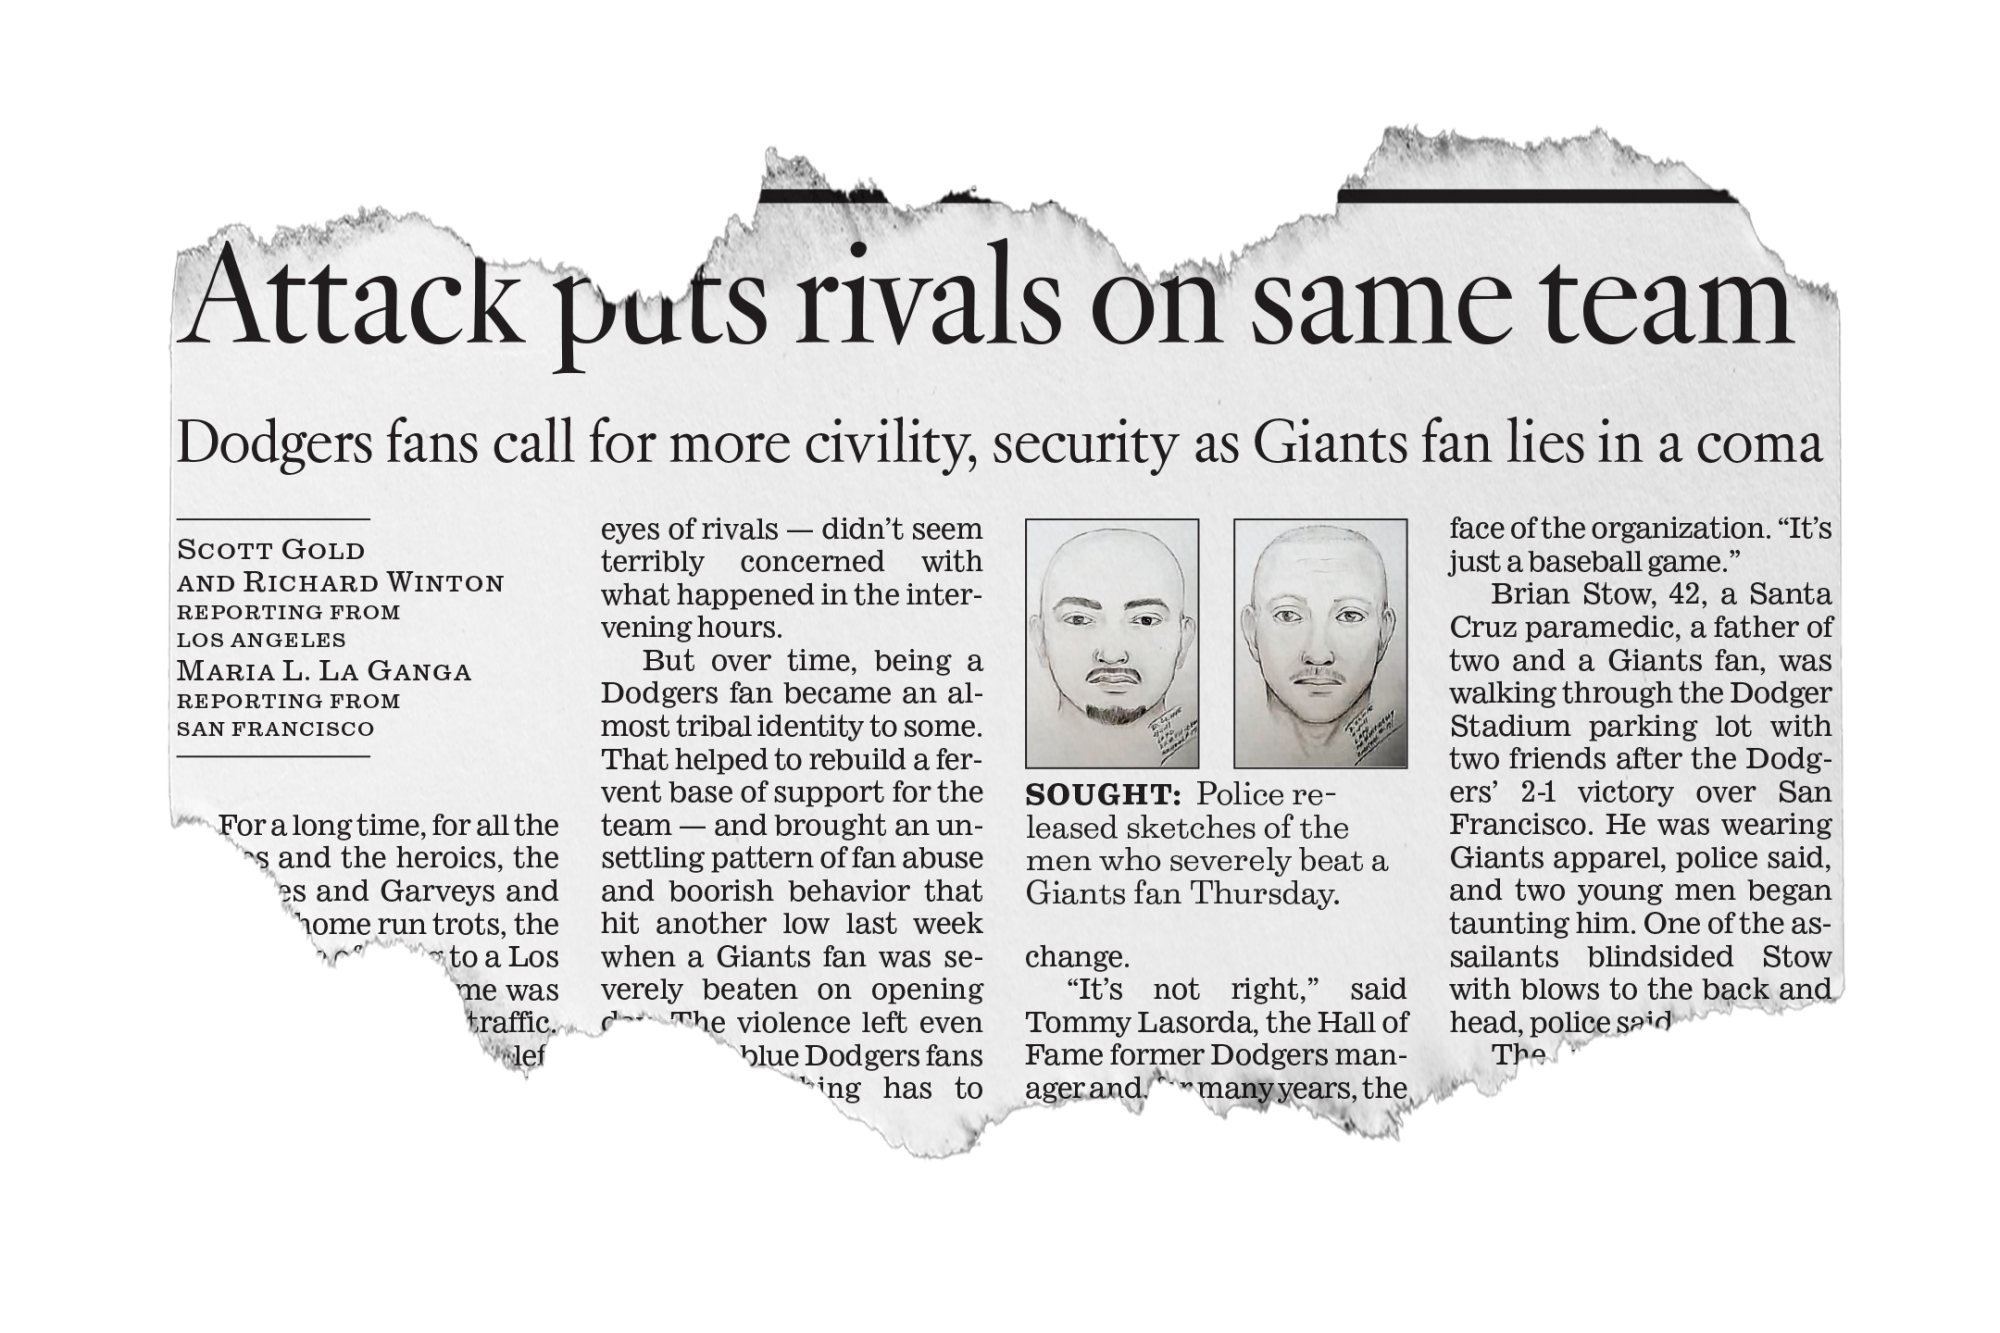 A newspaper clipping for an old story, with the headline "Attack puts rivals on the same team"